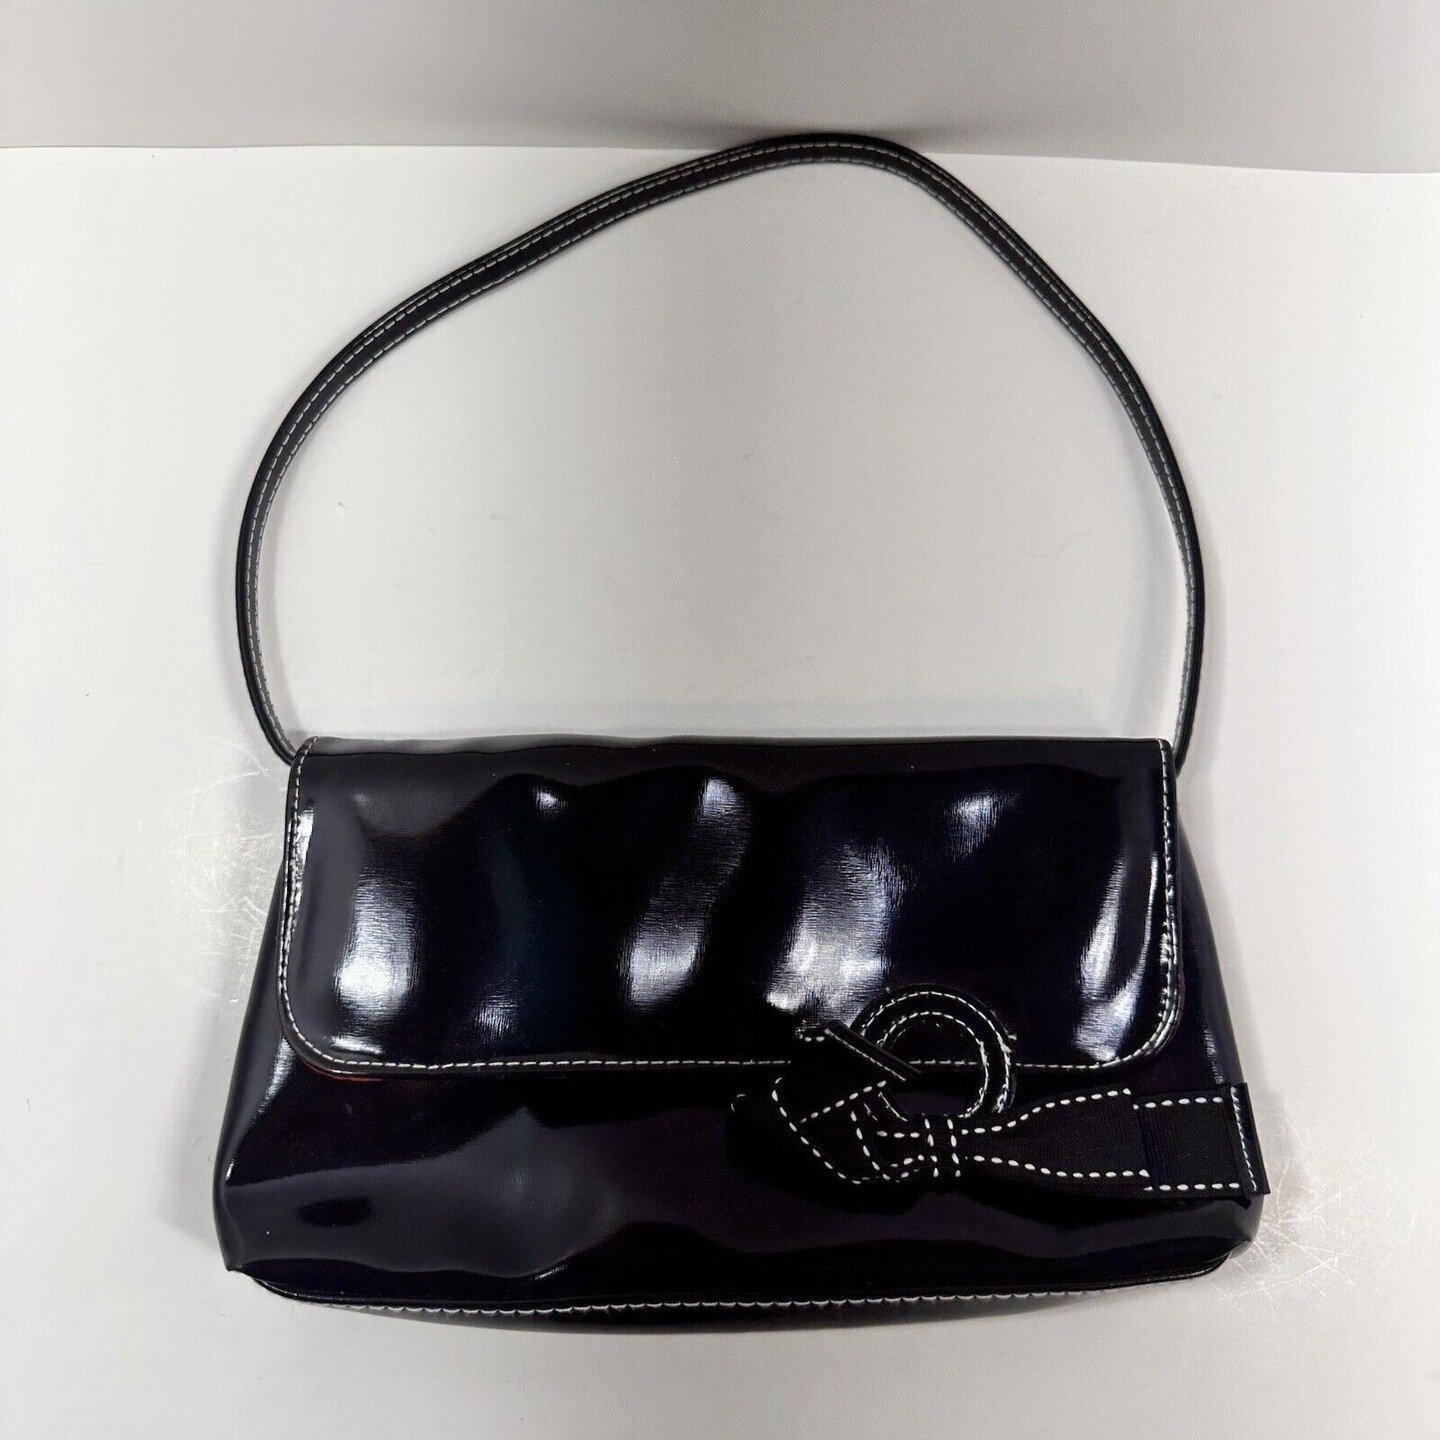 Preowned Victoria Secret Faux Patent Leather Women's Small Shoulder Bag Y2K Style
$20.99

Very fun y2k small shoulder clutch bag. Red interior is a nice touch. Branded inside. No info on materials. Feels like a plastic faux patent leather. Good condi